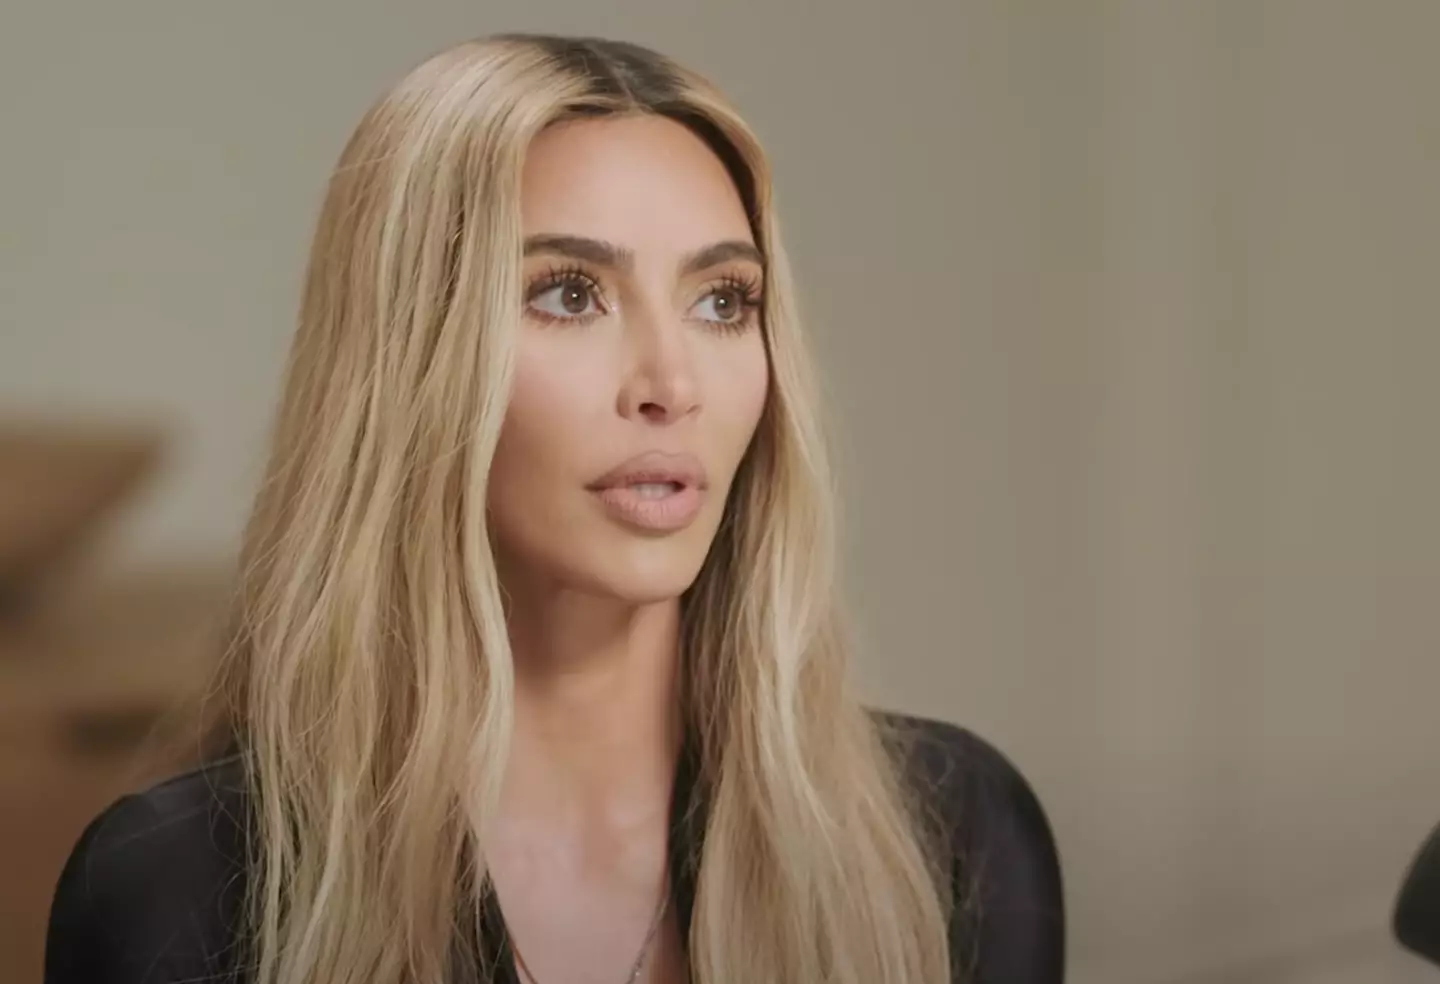 Kim Kardashian has responded to the backlash she faced online over her 'work harder' comments.